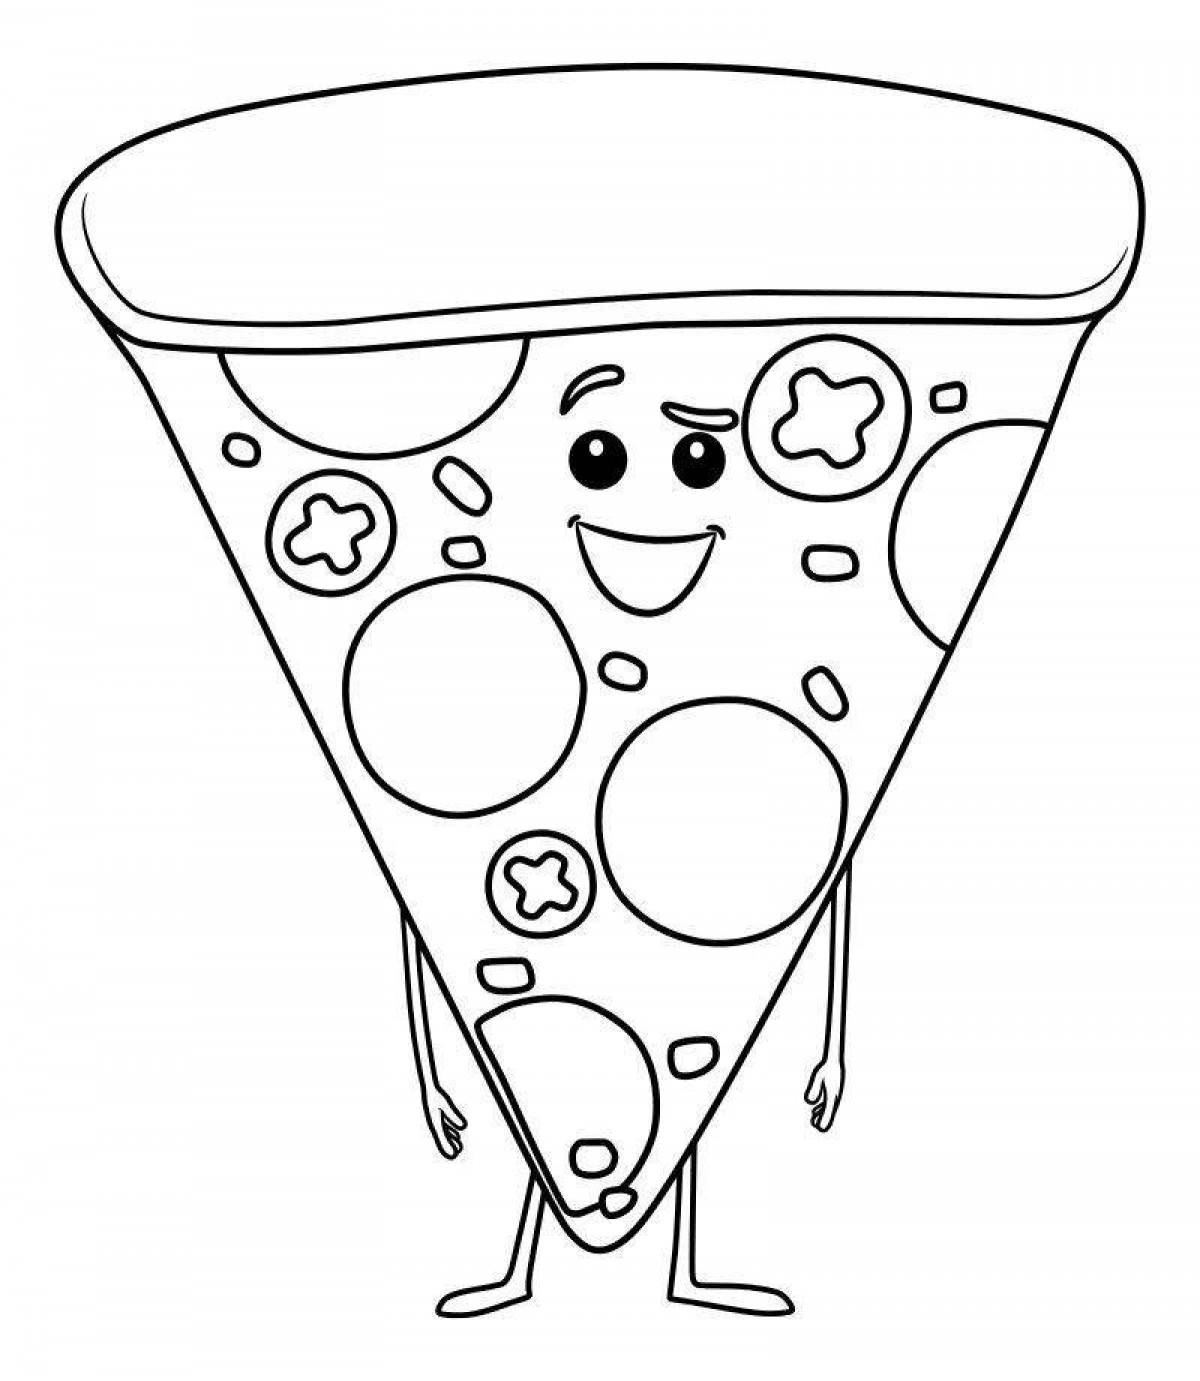 Coloring page sweet pizzeria